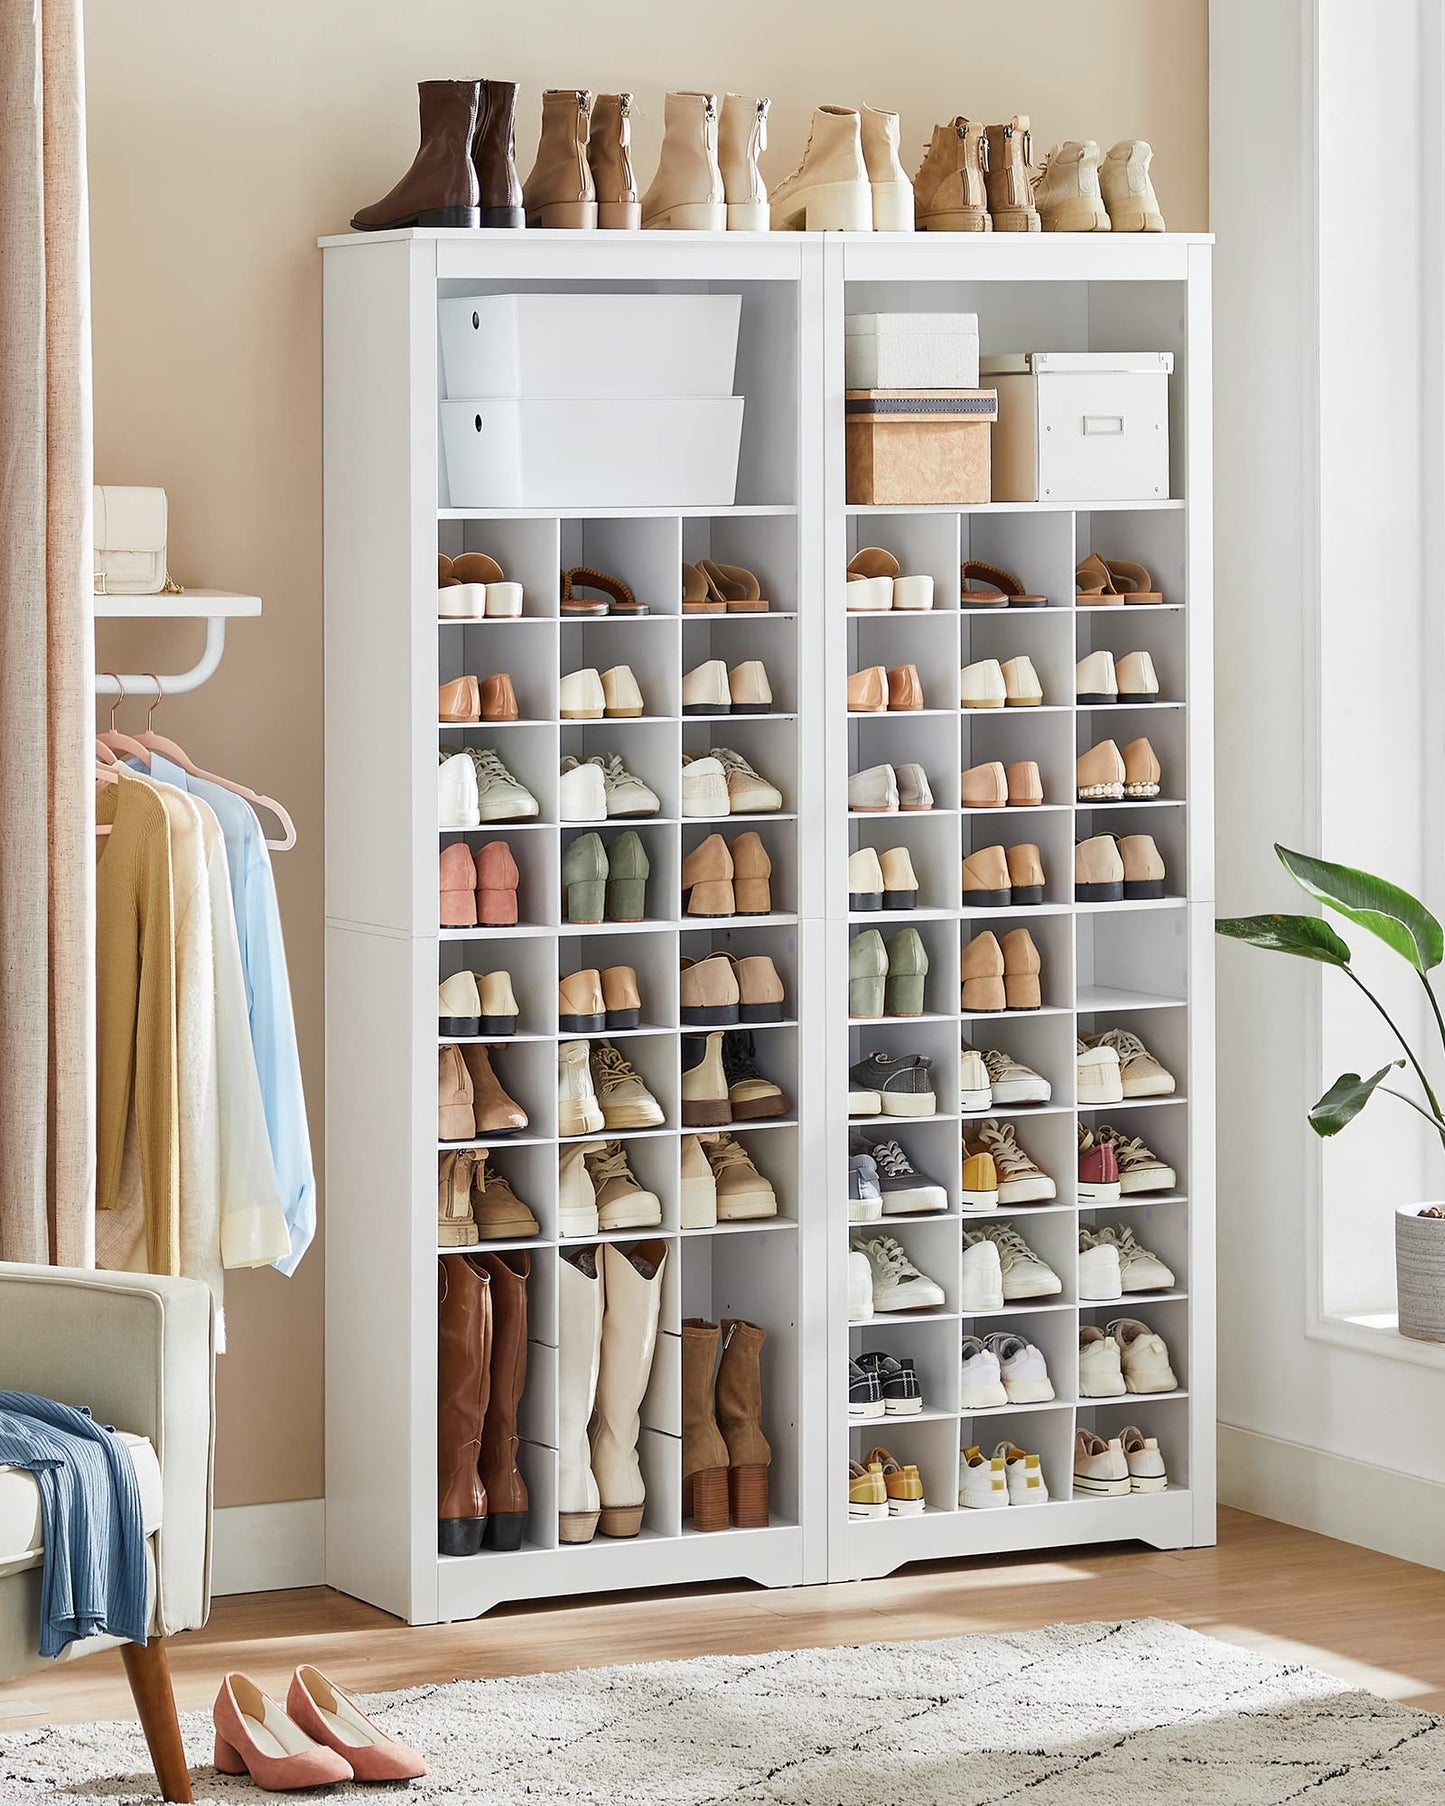 VASAGLE Shoe Storage Cabinet, 10 Tier Shoe Rack Organizer, Holds Up to 30 Pairs of Shoes, for Entryway Bedroom, 12.6 x 24.8 x 73.6 Inches, White ULBS273T14